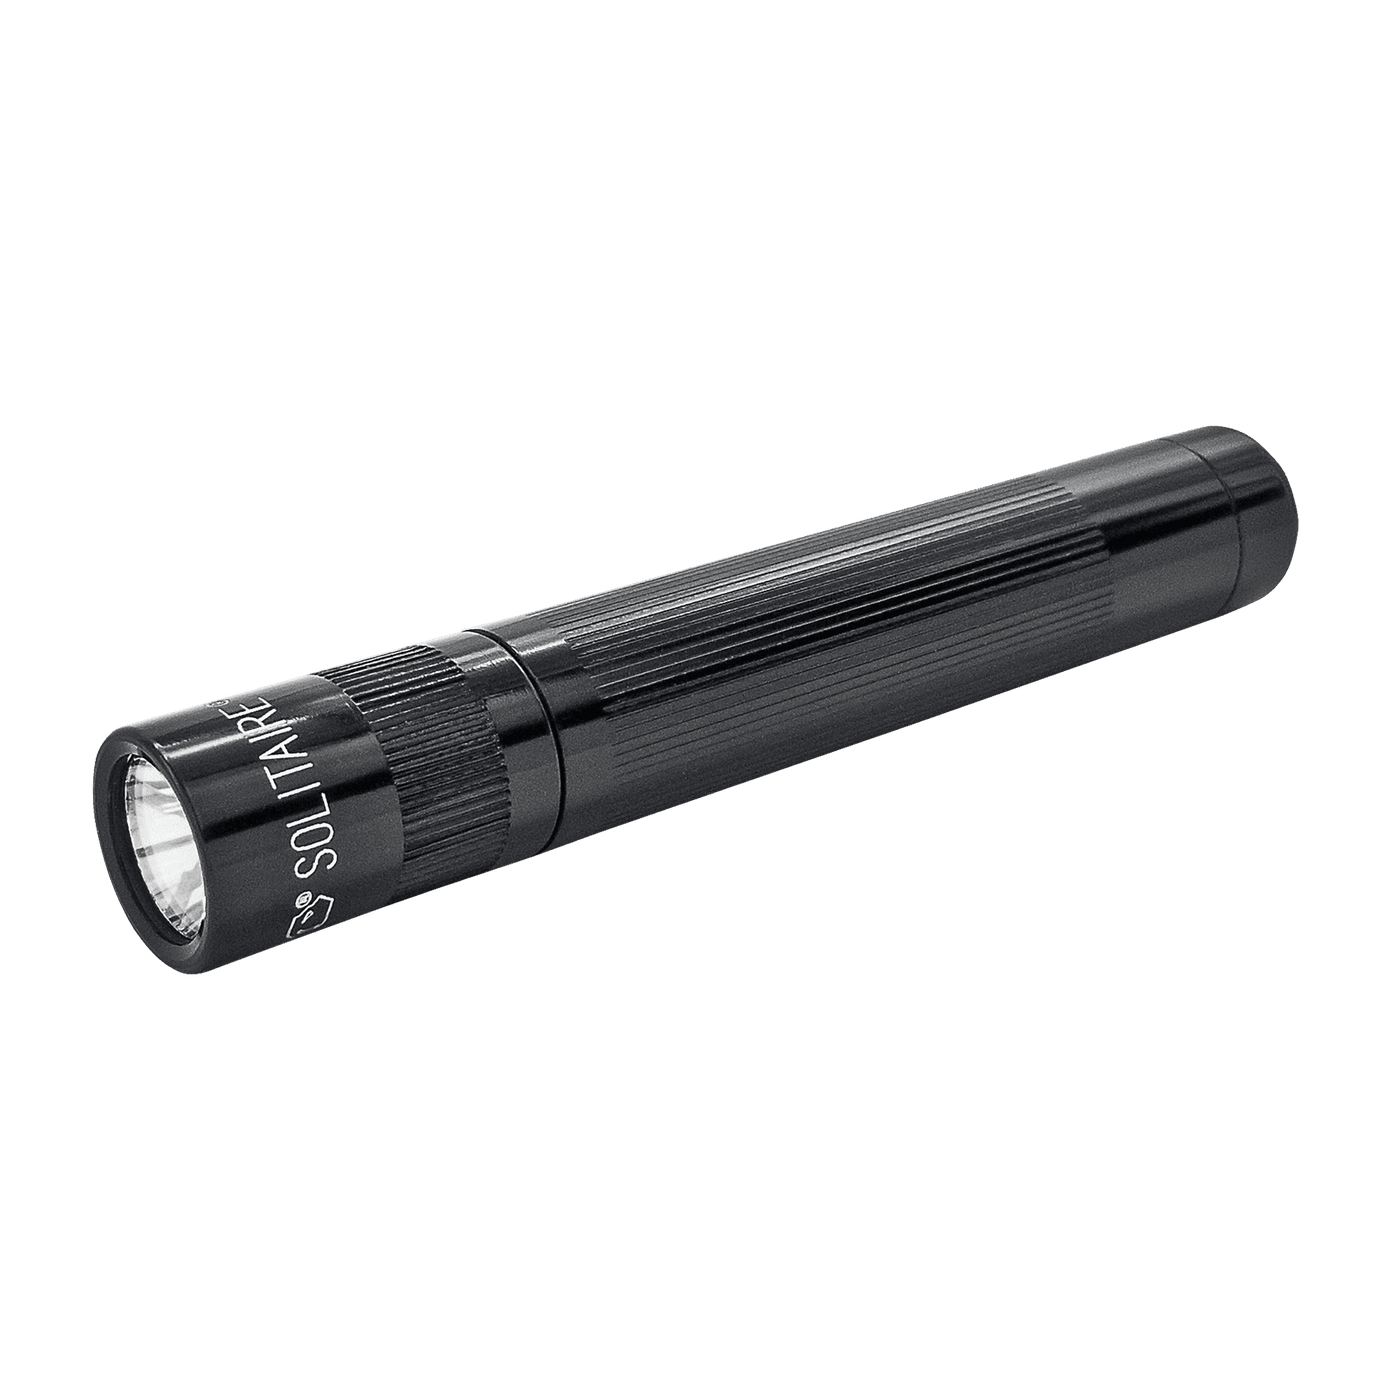 Solitaire LED Chain Light / Gerber – Maglite